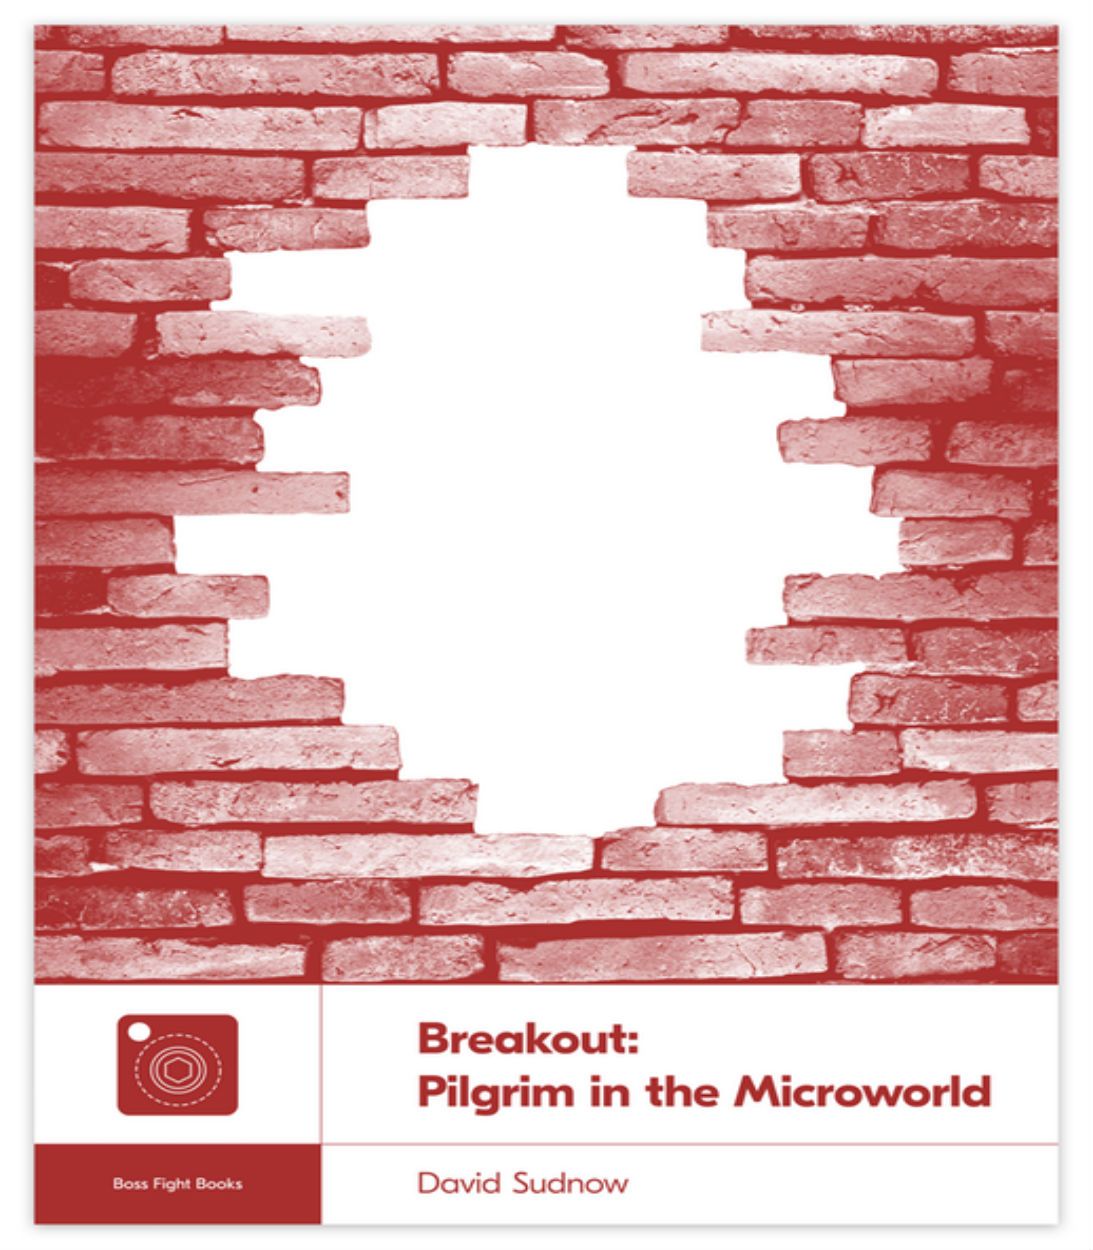 Breakout: Pilgrim in the Microworld